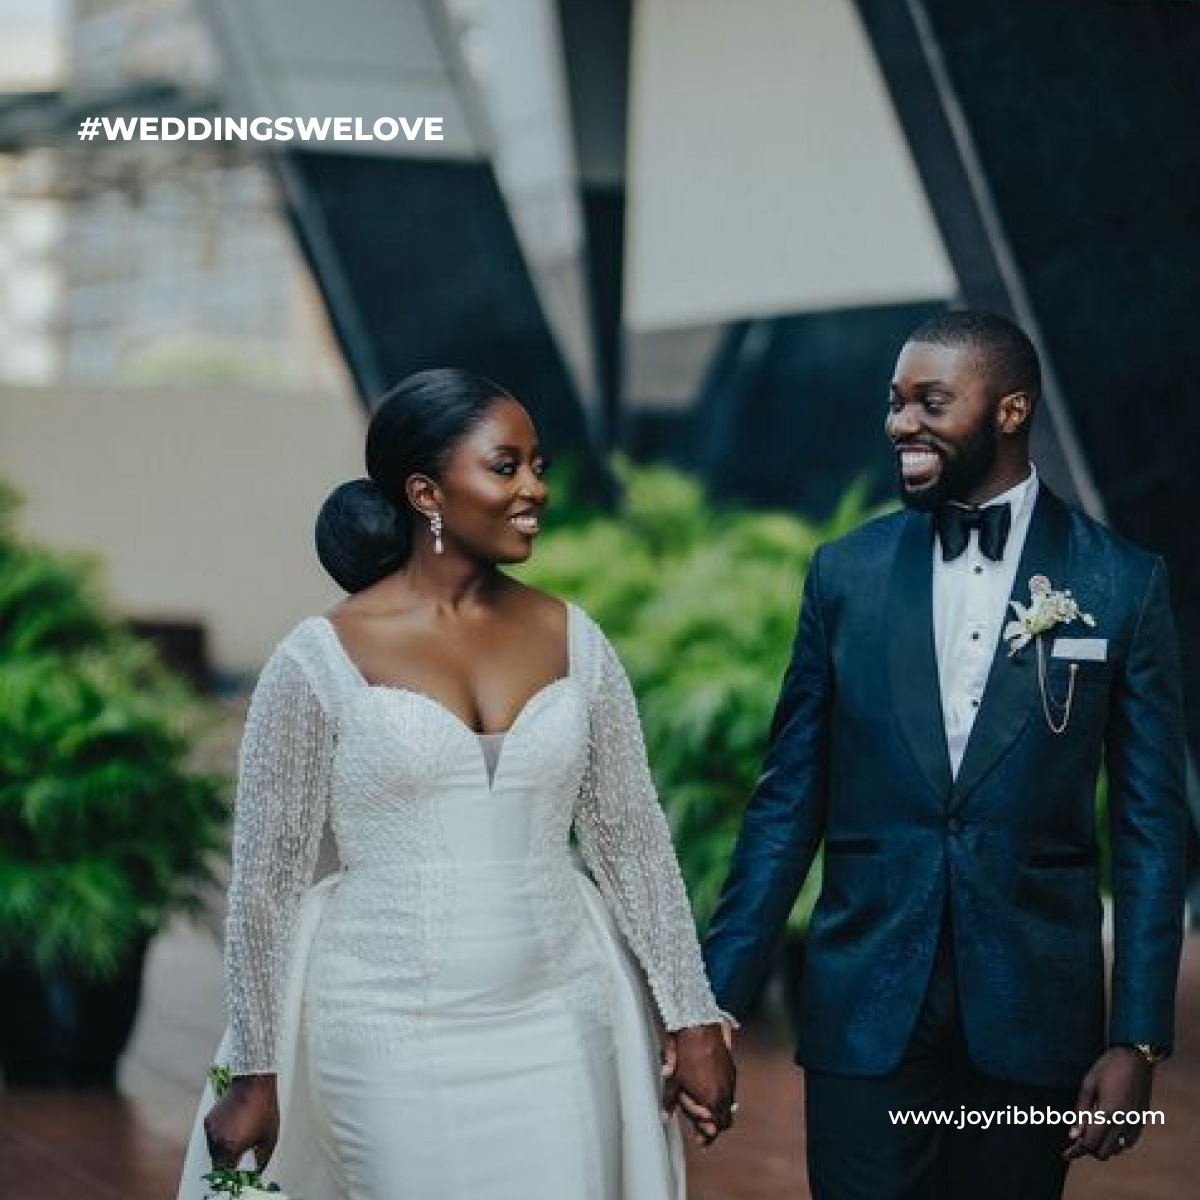 JoyRibbons is top gift registry site in Nigeria. Couples getting married in Nigeria today can receive gift on their wishlist, see RSVP and share their wedding information with their loved ones using JoyRibbons. We are the 
              company that will do everything and anything for love